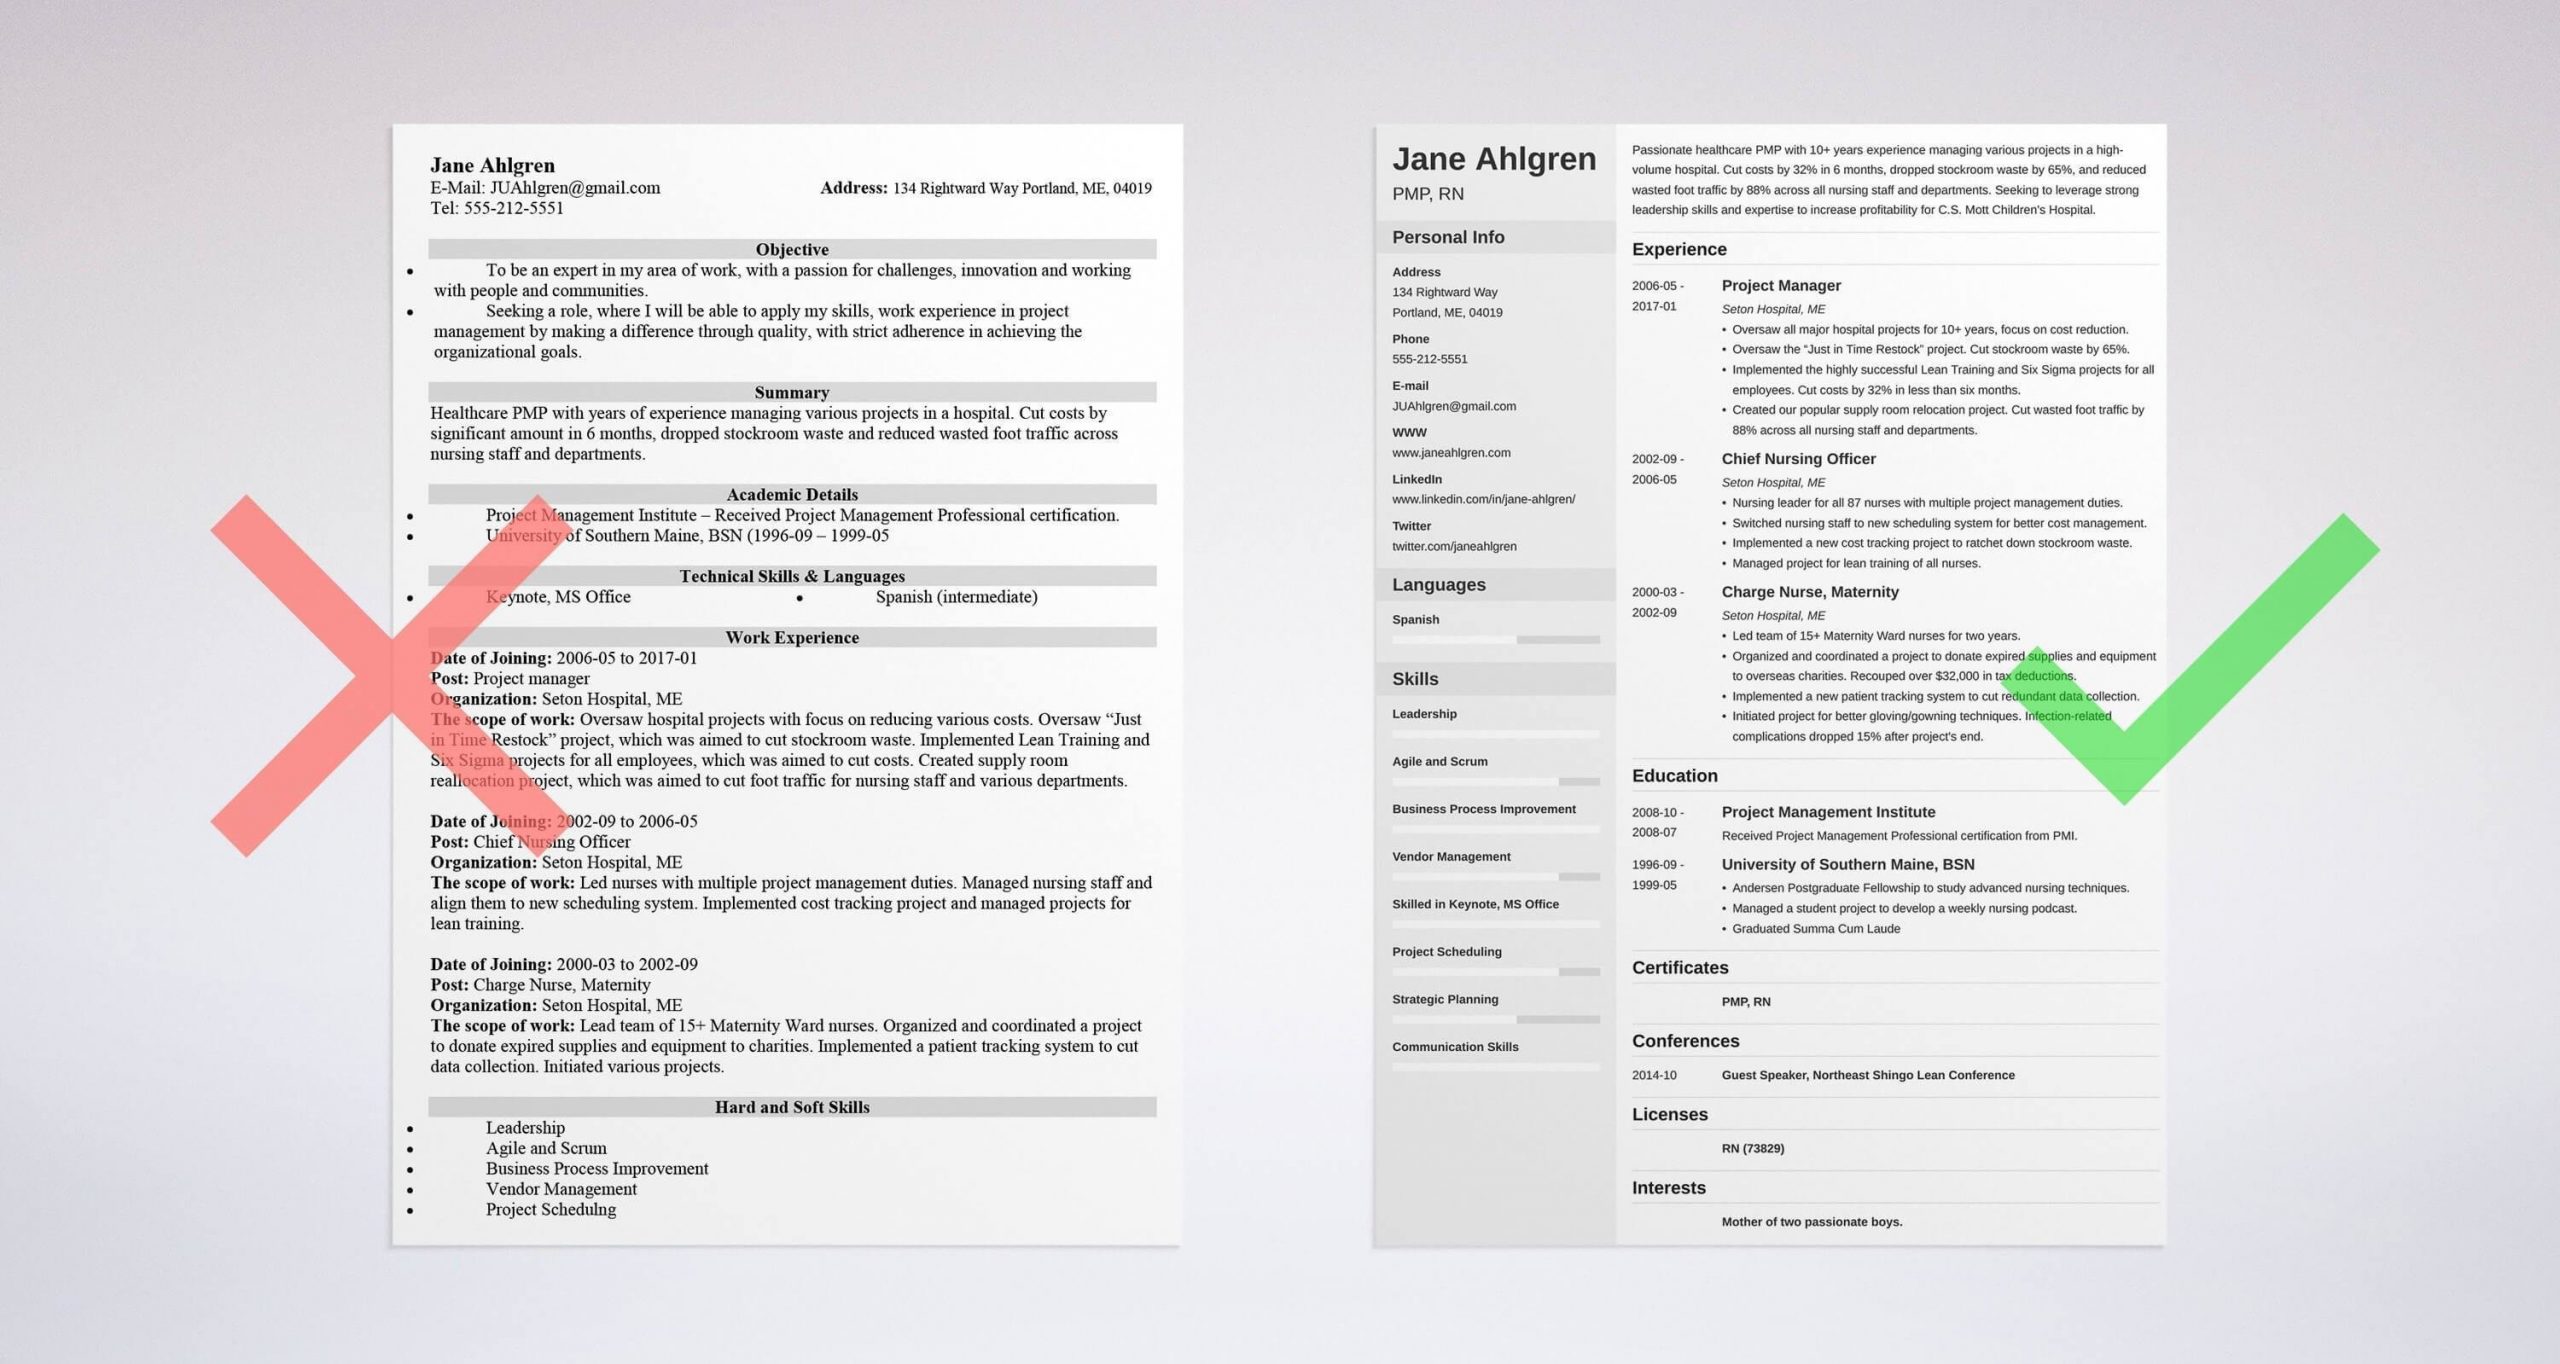 Reverse Chronological Resume Template Free Download Reverse Chronological Resume Templates & format Examples